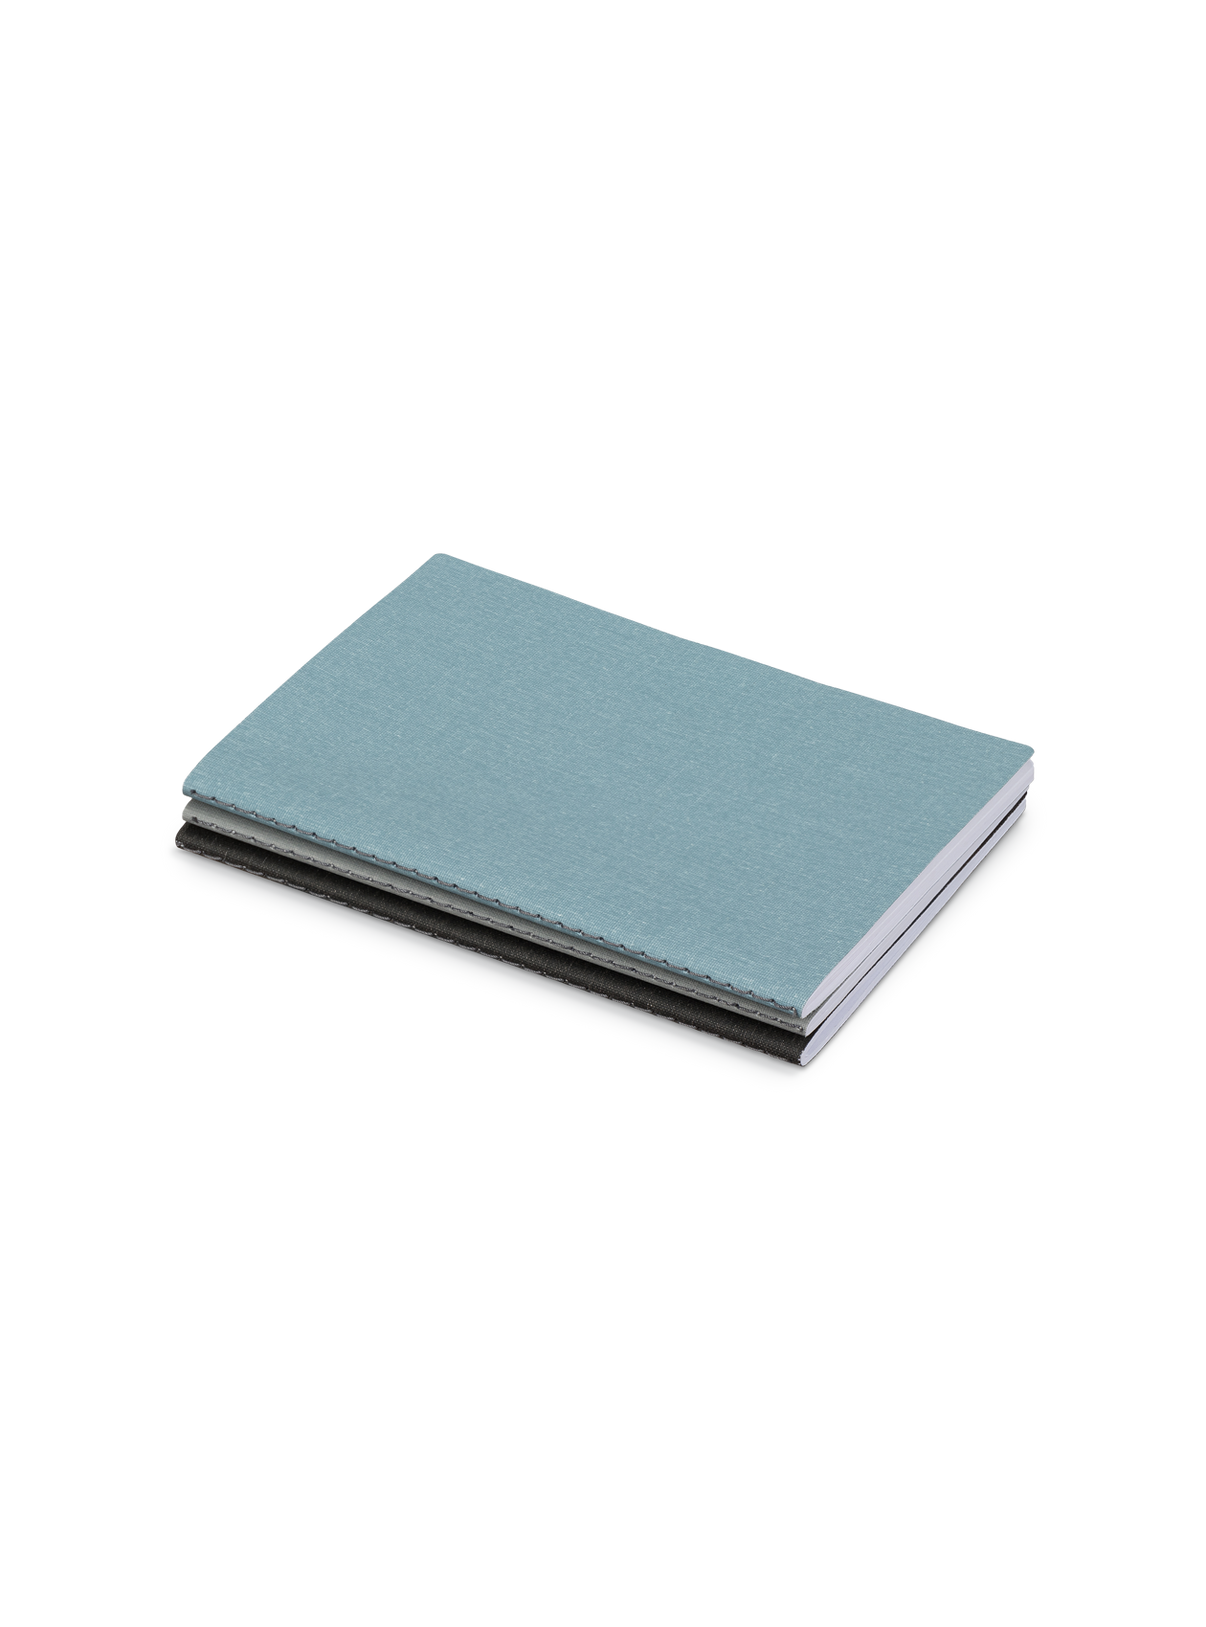 Appointed Mini Linen Jotter in Chambray Blue, Dove Gray, and Charcoal Gray bookcloth stacked angled view || Chambray Blue